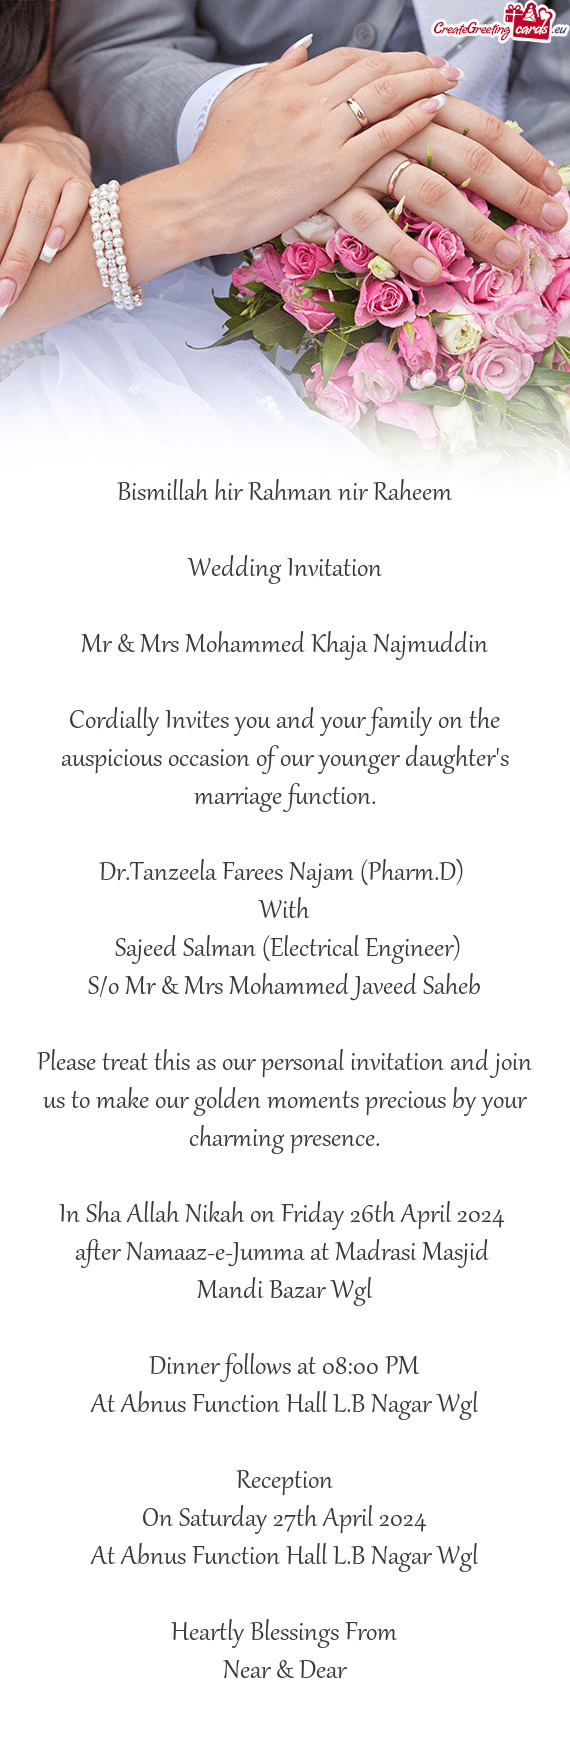 Cordially Invites you and your family on the auspicious occasion of our younger daughter